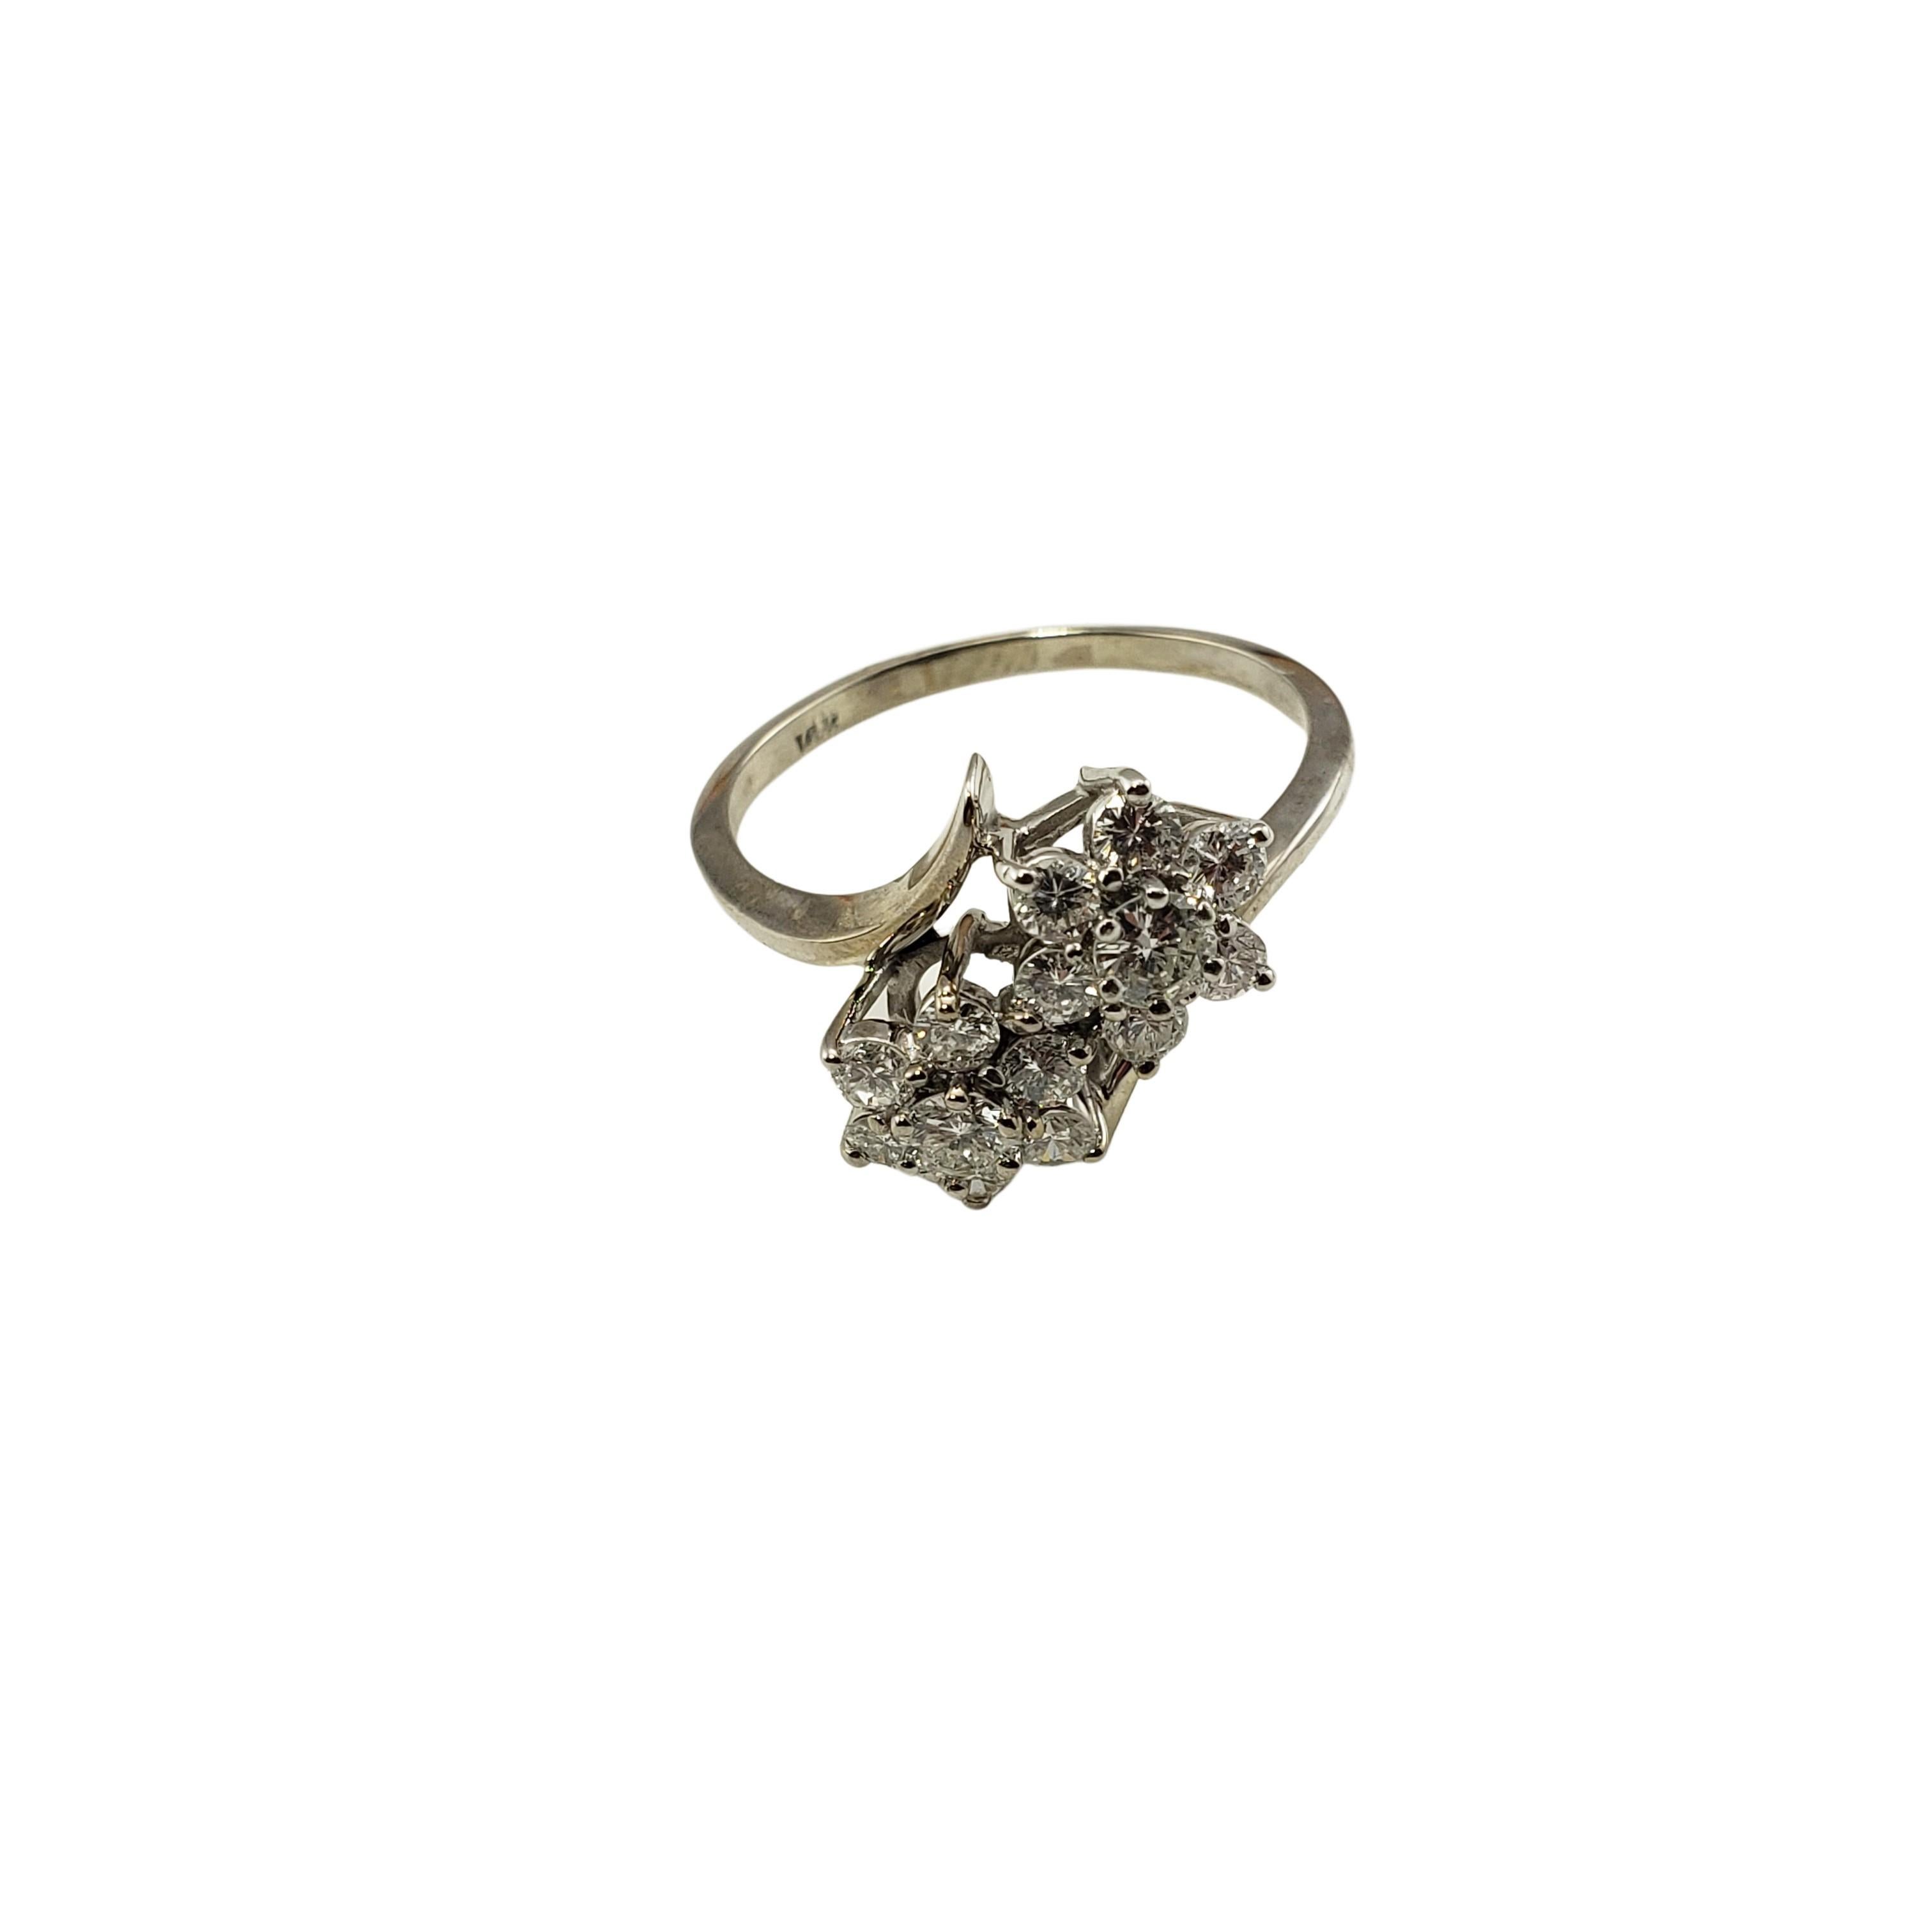 Vintage 14 Karat White Gold Diamond Flower Ring Size 9-

This sparkling flower ring features 14 round brilliant cut diamonds set in classic 14K white gold.  Width:  12 mm.  Shank:  1.5 mm.

Approximate total diamond weight:  1.05 ct.

Diamond color: